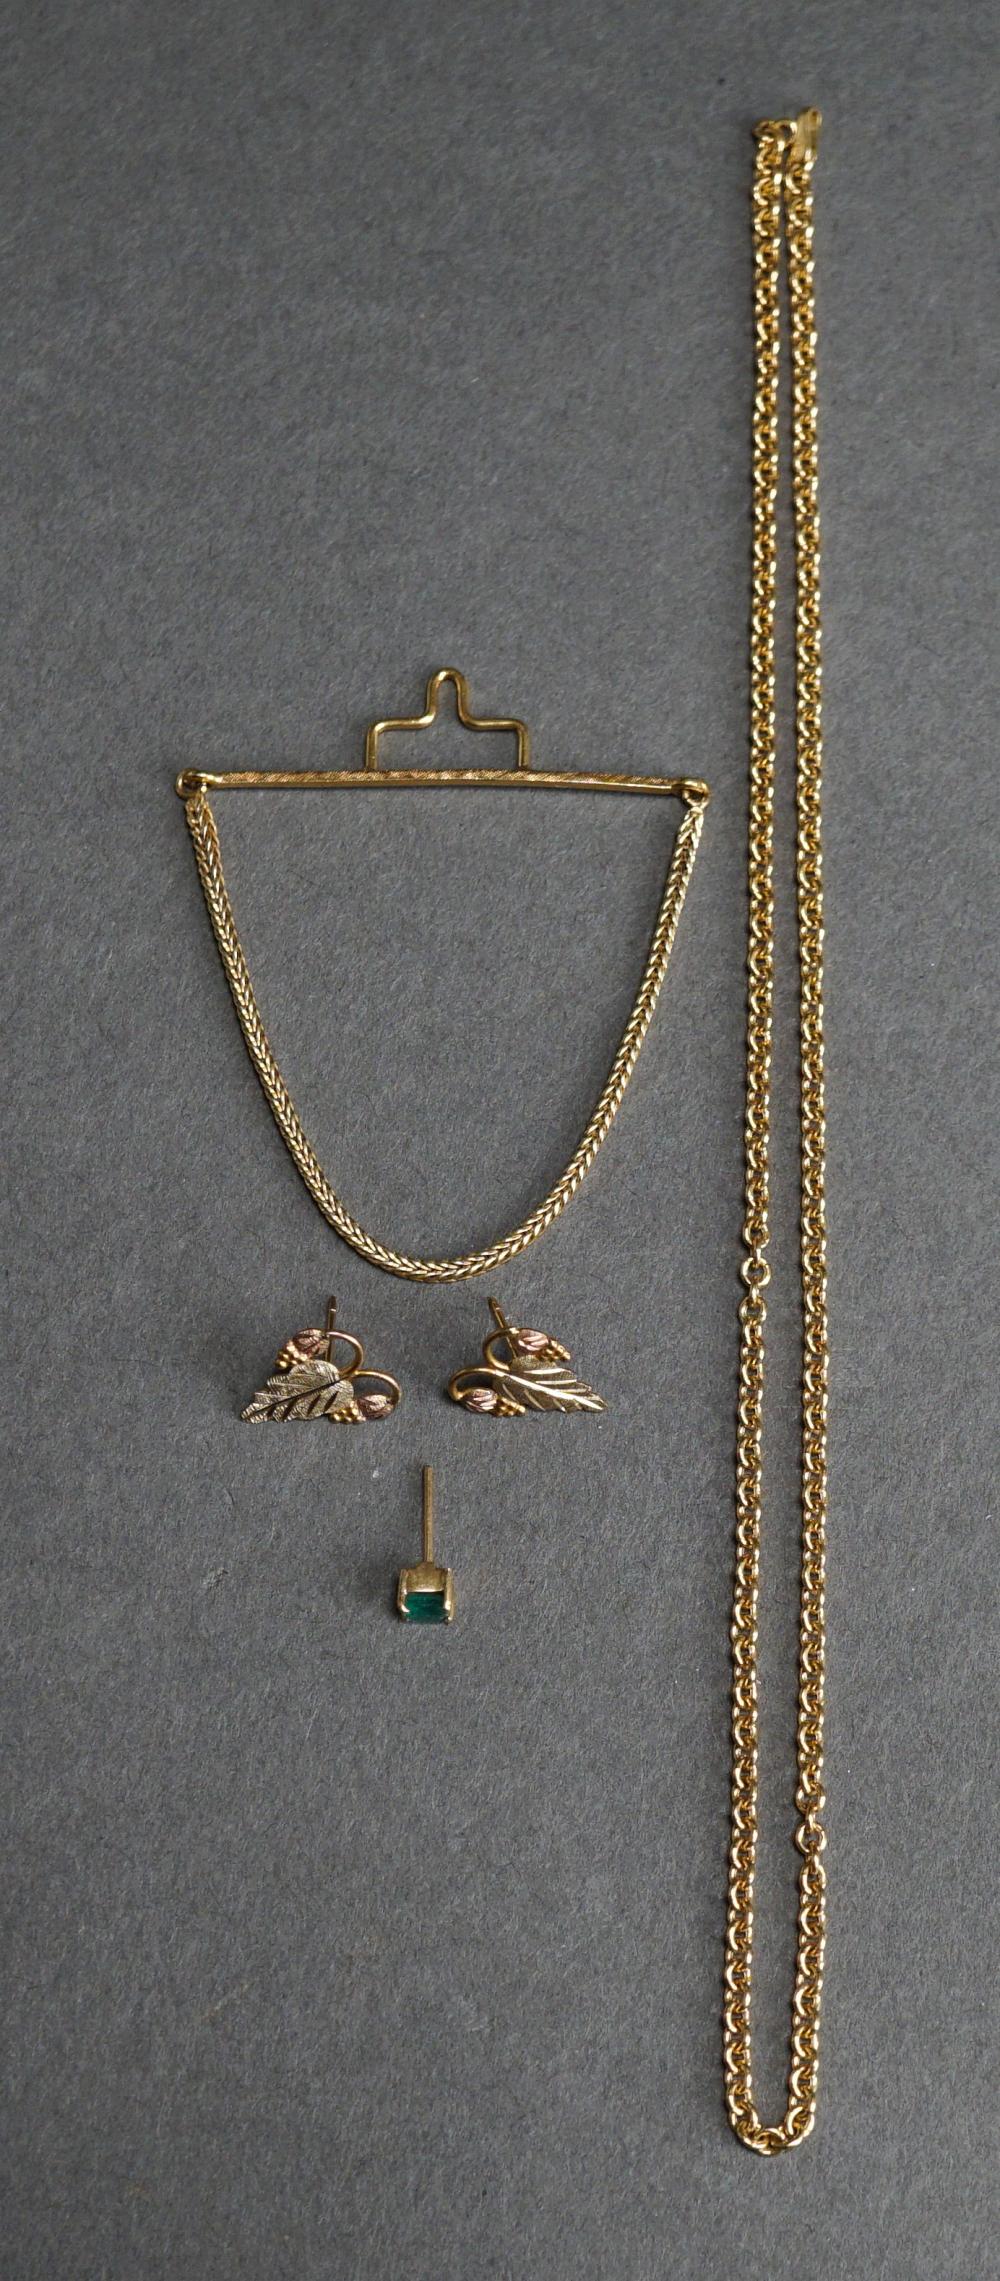 COLLECTION OF GOLD JEWELRY 18K  2e65df